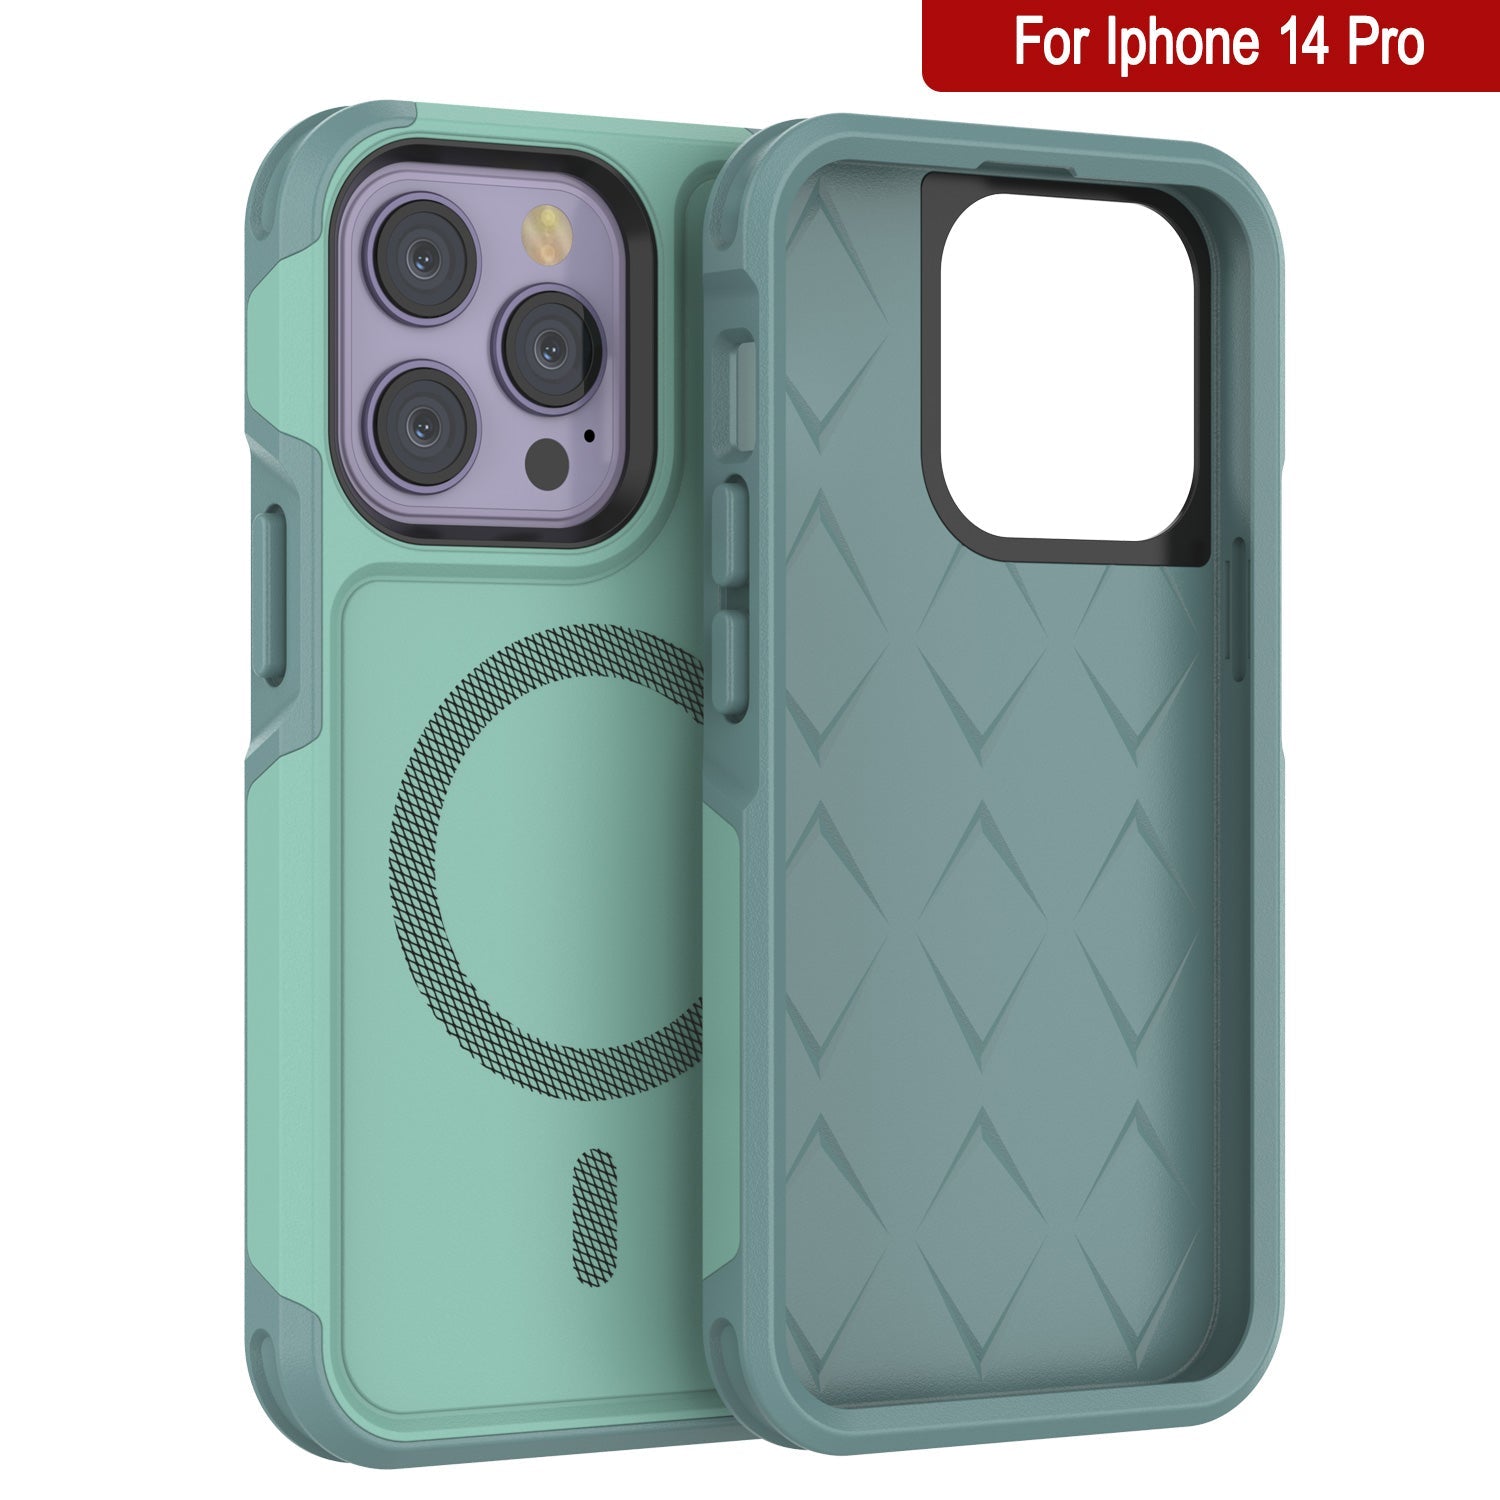 PunkCase iPhone 14 Pro Case, [Spartan 2.0 Series] Clear Rugged Heavy Duty Cover W/Built in Screen Protector [Teal]